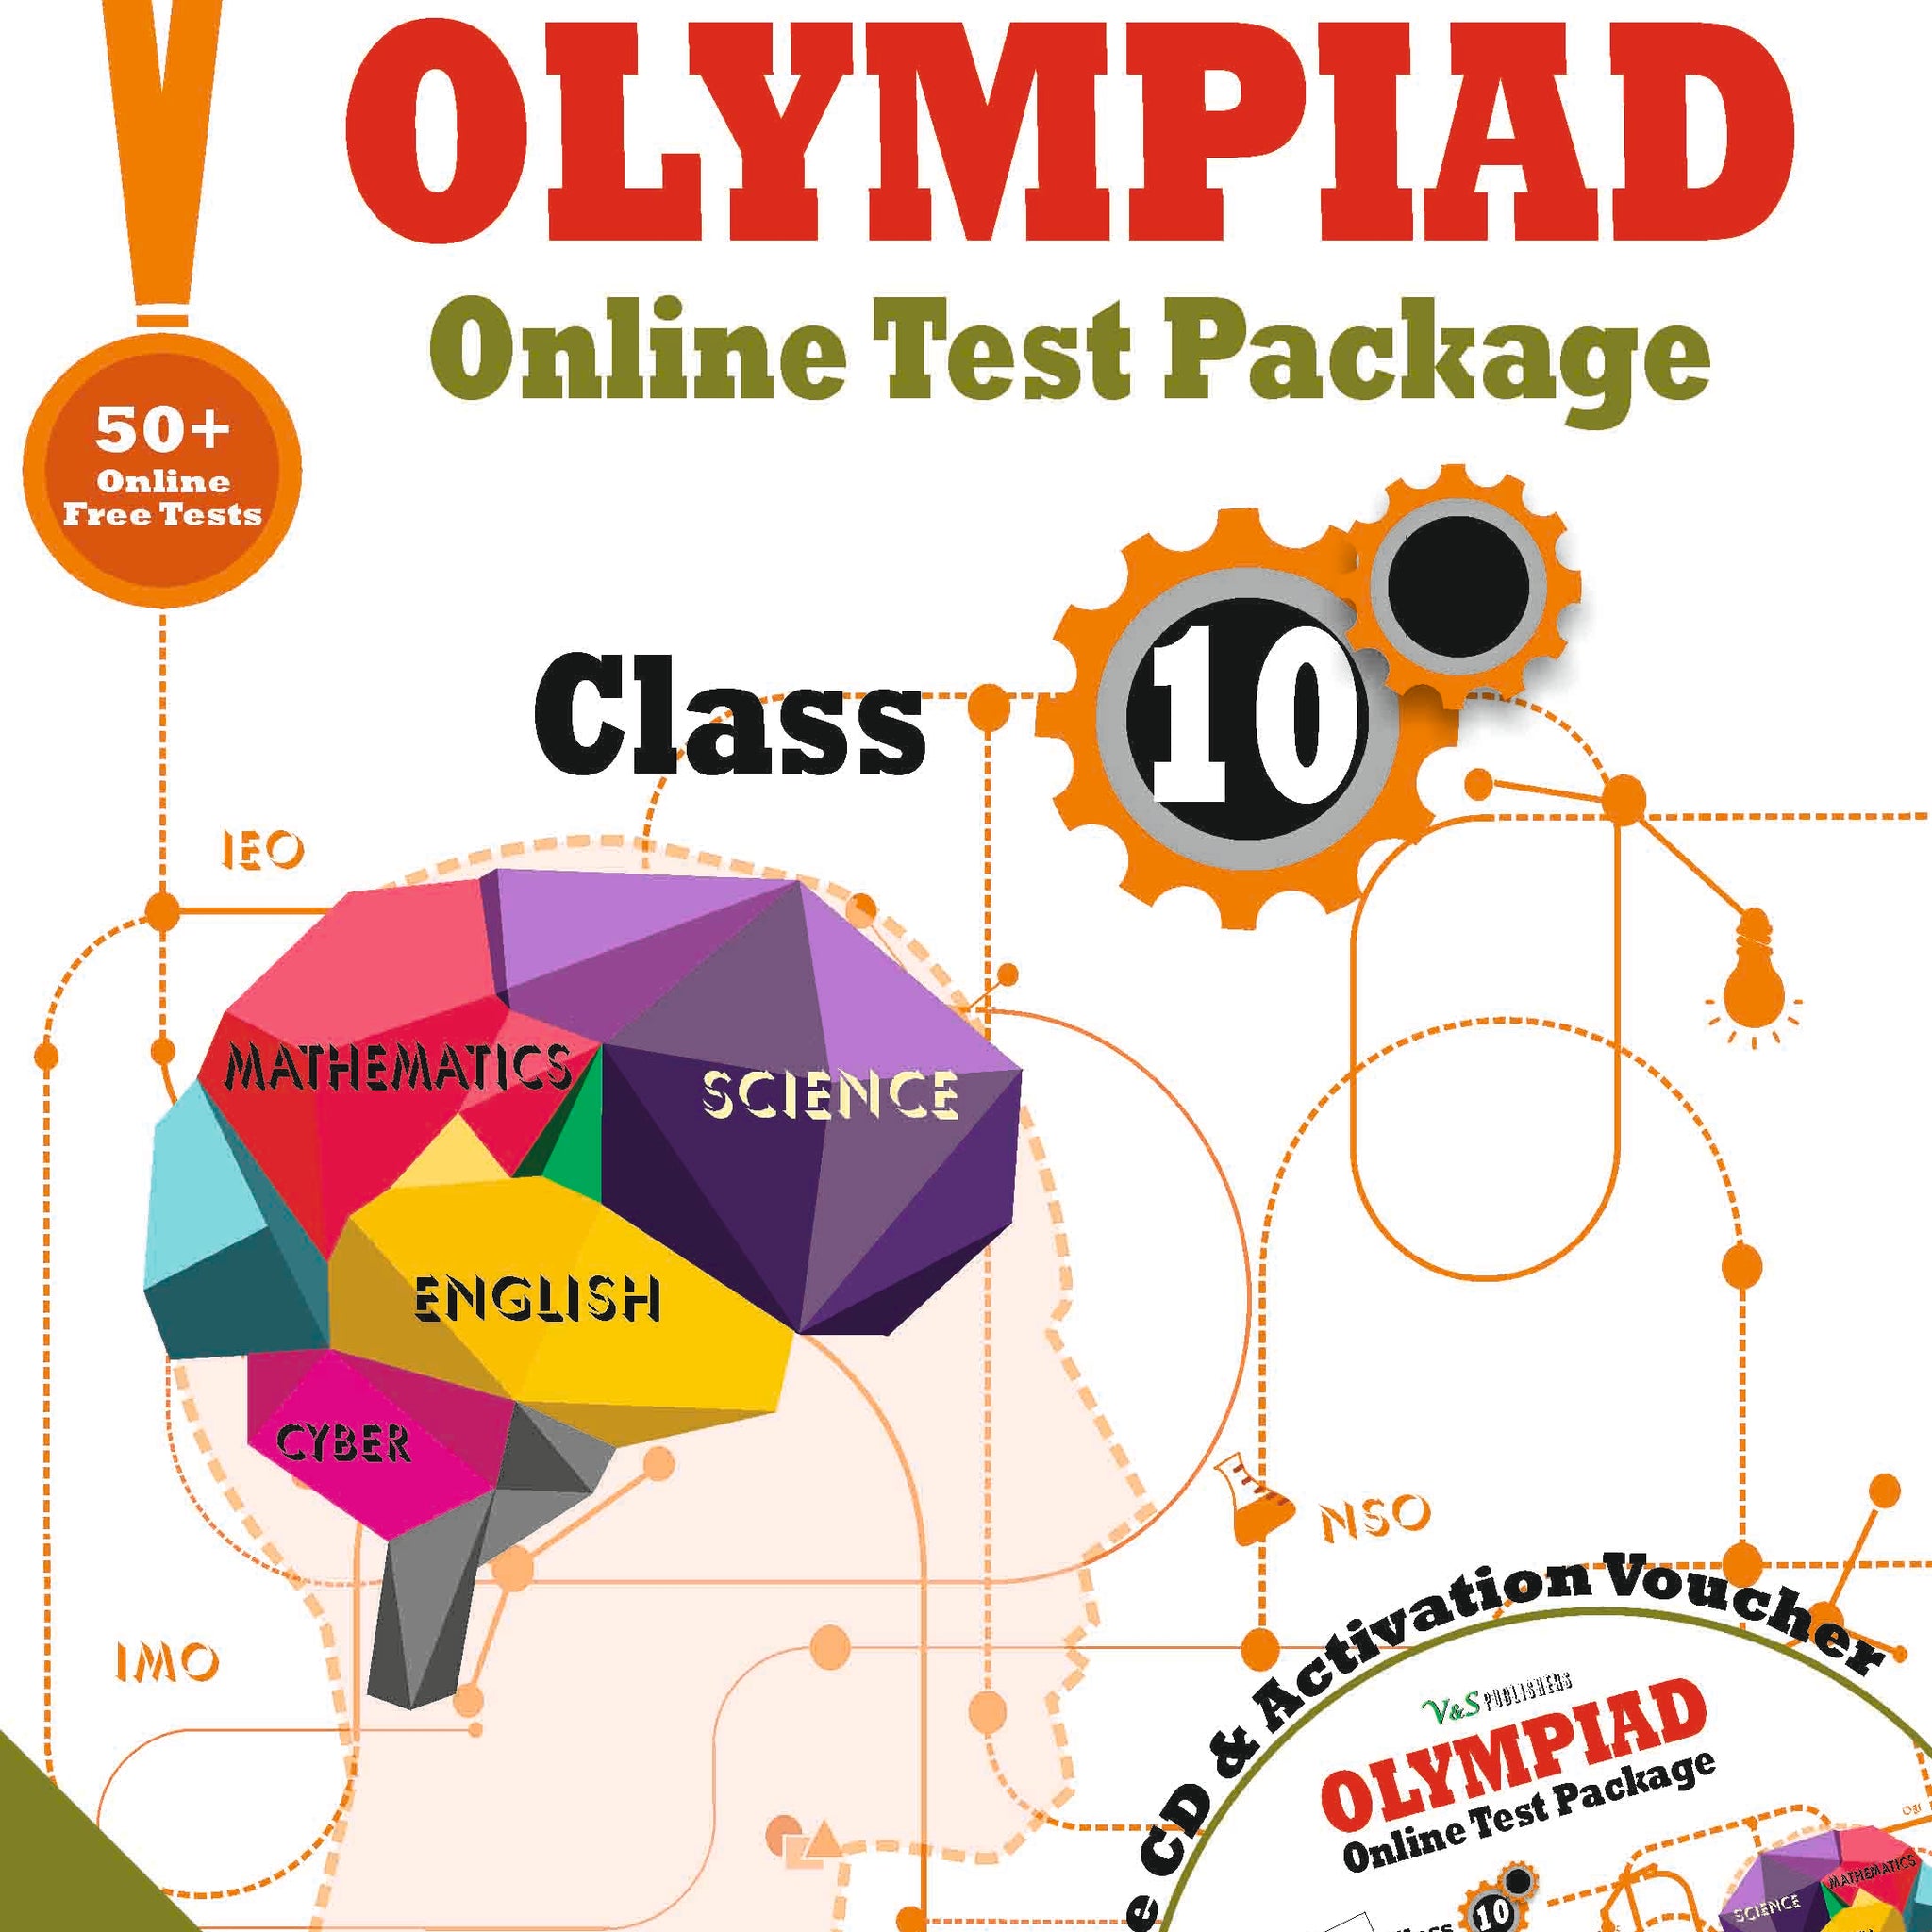 Olympiad Online Test Package Class 10 (Free CD With Activation Voucher)